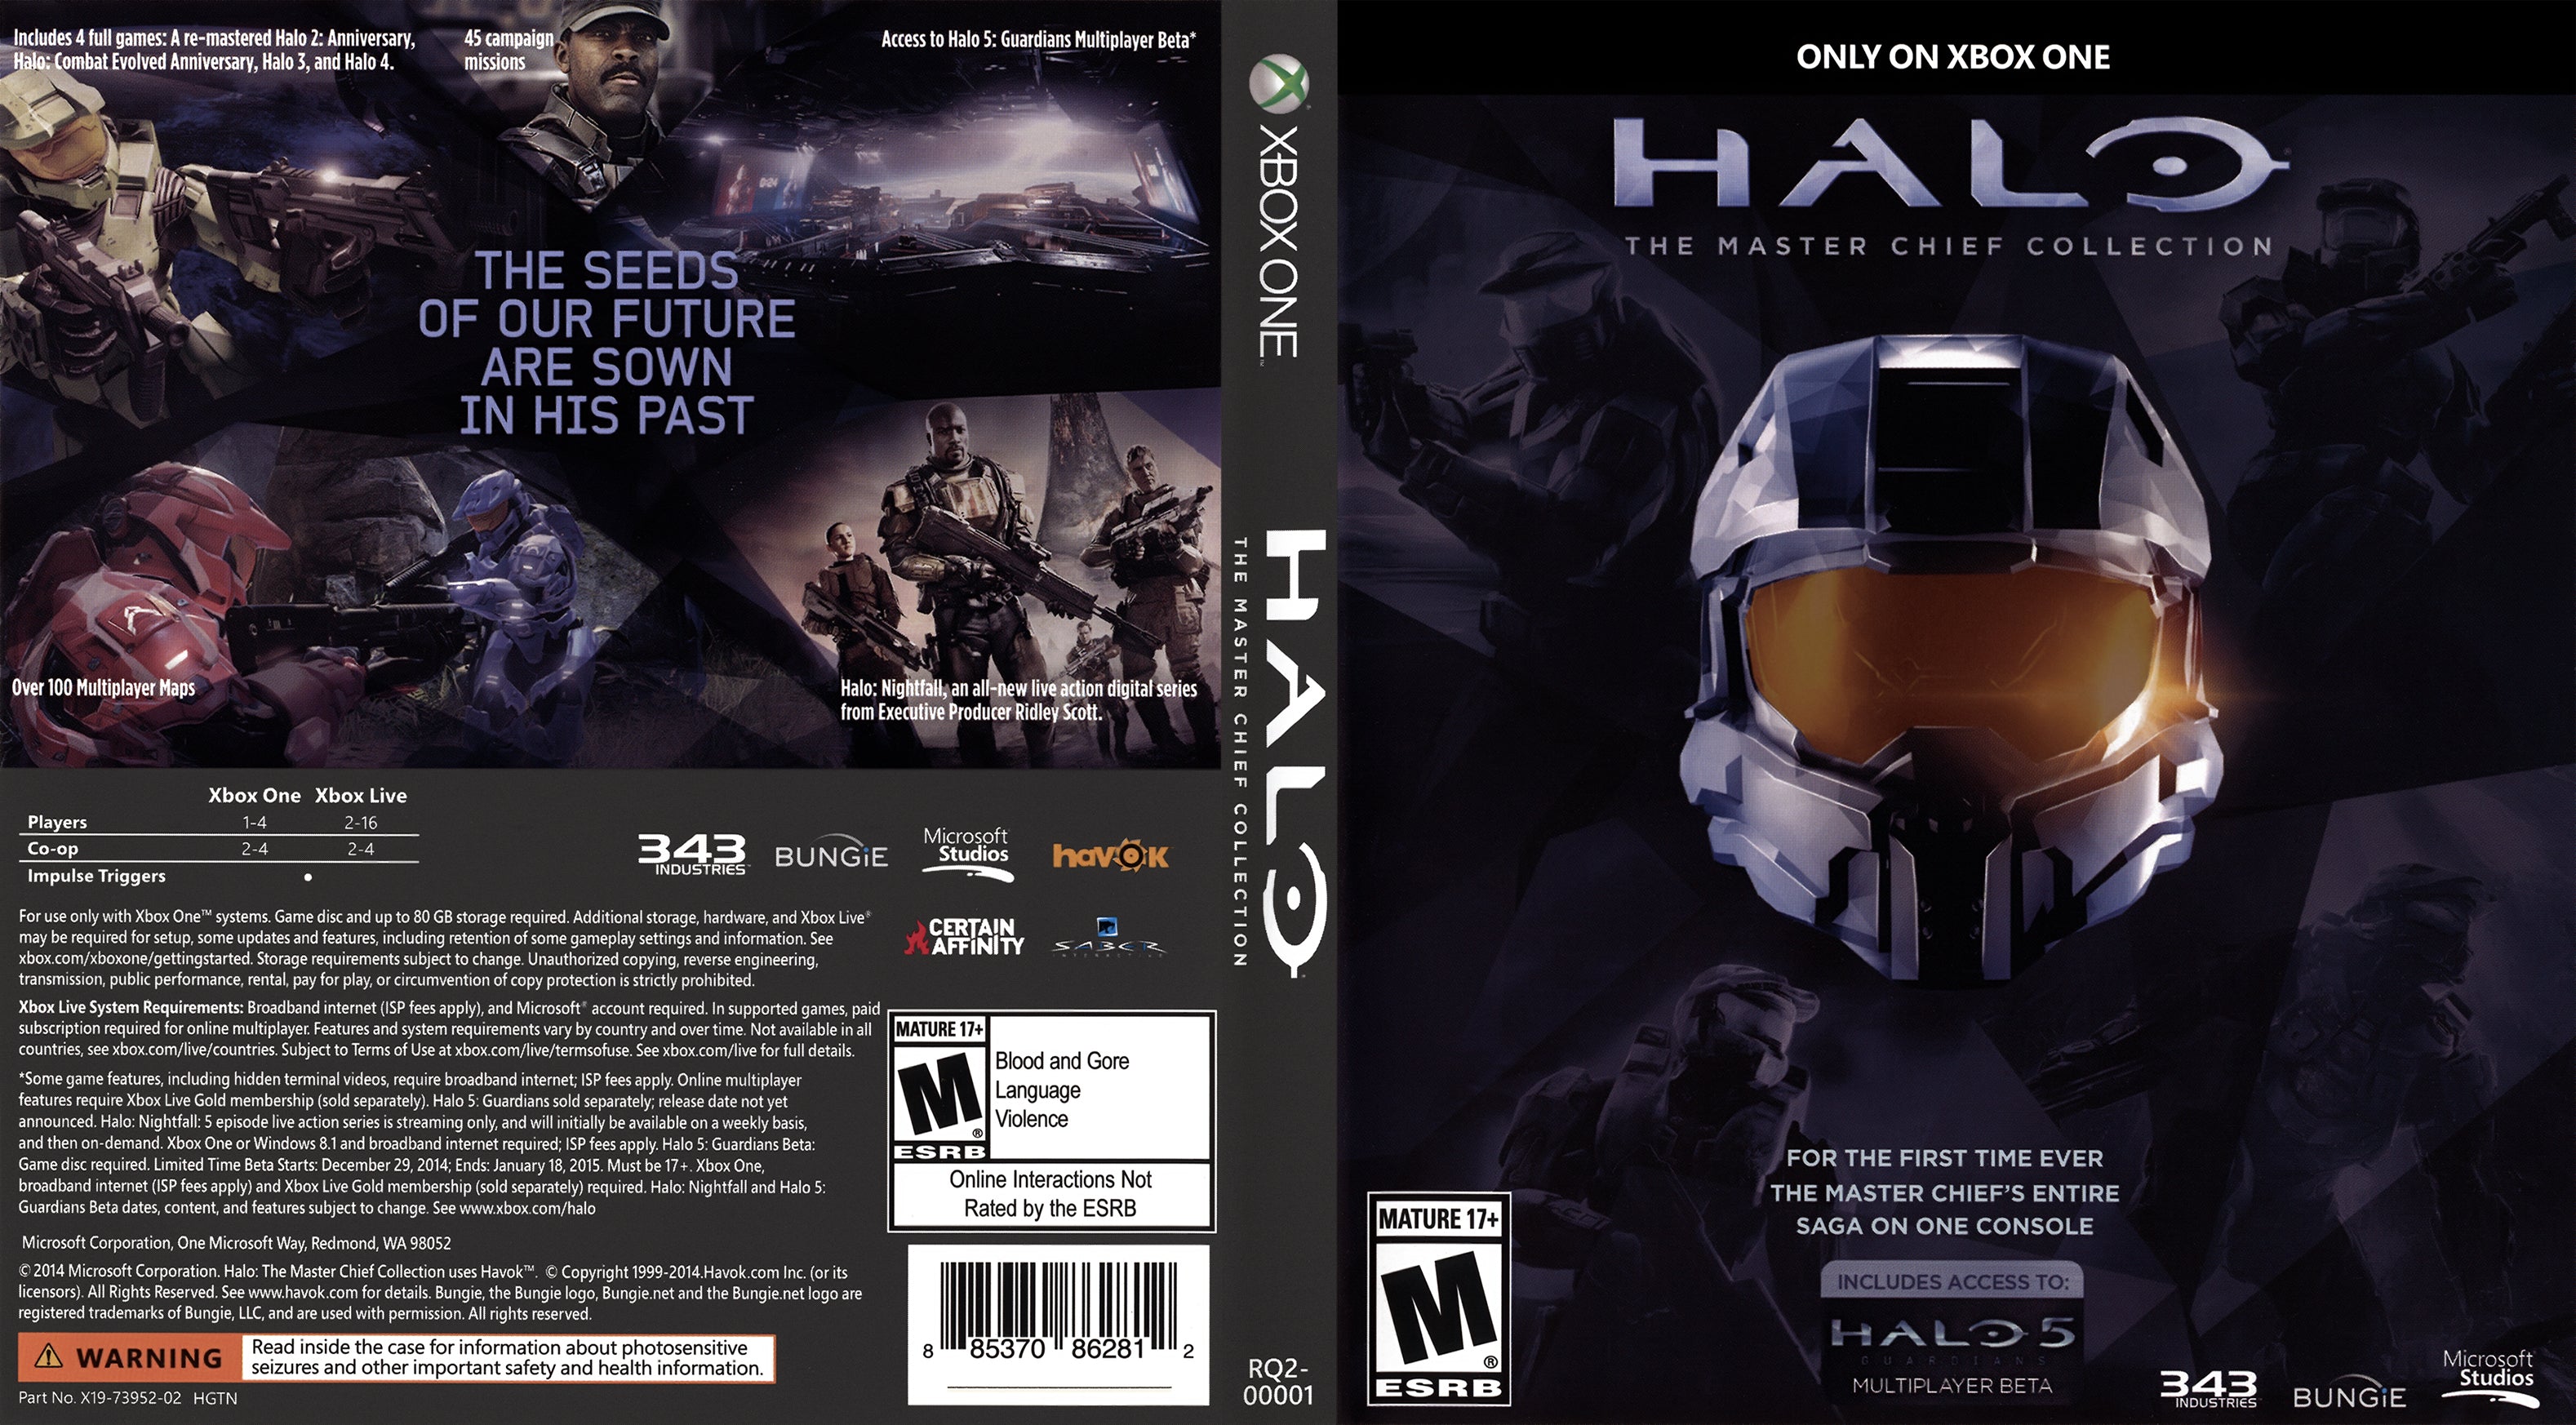 Halo: The Master Chief Collection Master Edition Xbox One, Xbox